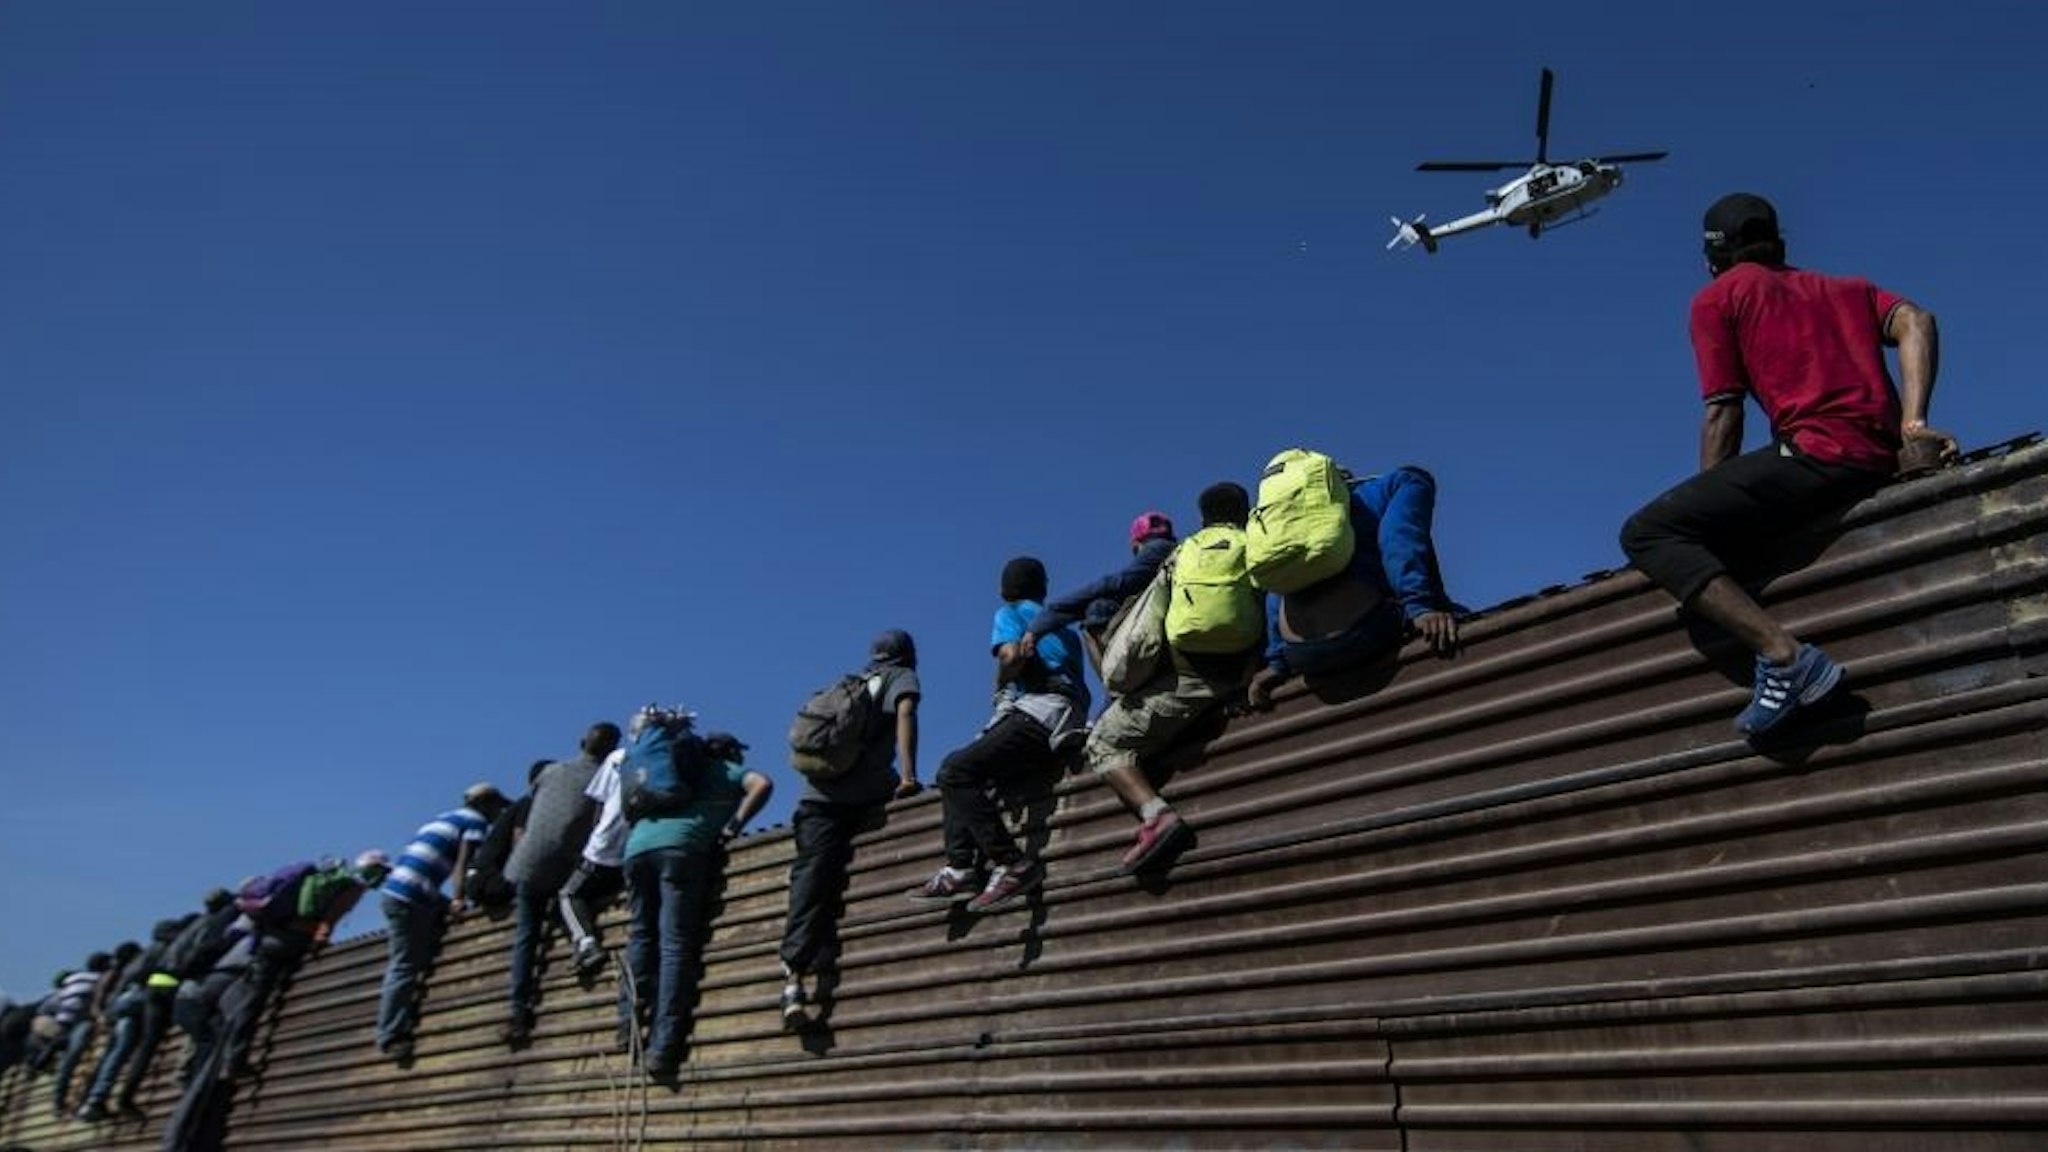 TOPSHOT - A group of Central American migrants -mostly Hondurans- climb a metal barrier on the Mexico-US border near El Chaparral border crossing, in Tijuana, Baja California State, Mexico, on November 25, 2018. - US officials closed the San Ysidro crossing point in southern California on Sunday after hundreds of migrants, part of the "caravan" condemned by President Donald Trump, tried to breach a fence from Tijuana, authorities announced. (Photo by Pedro PARDO / AFP) (Photo credit should read